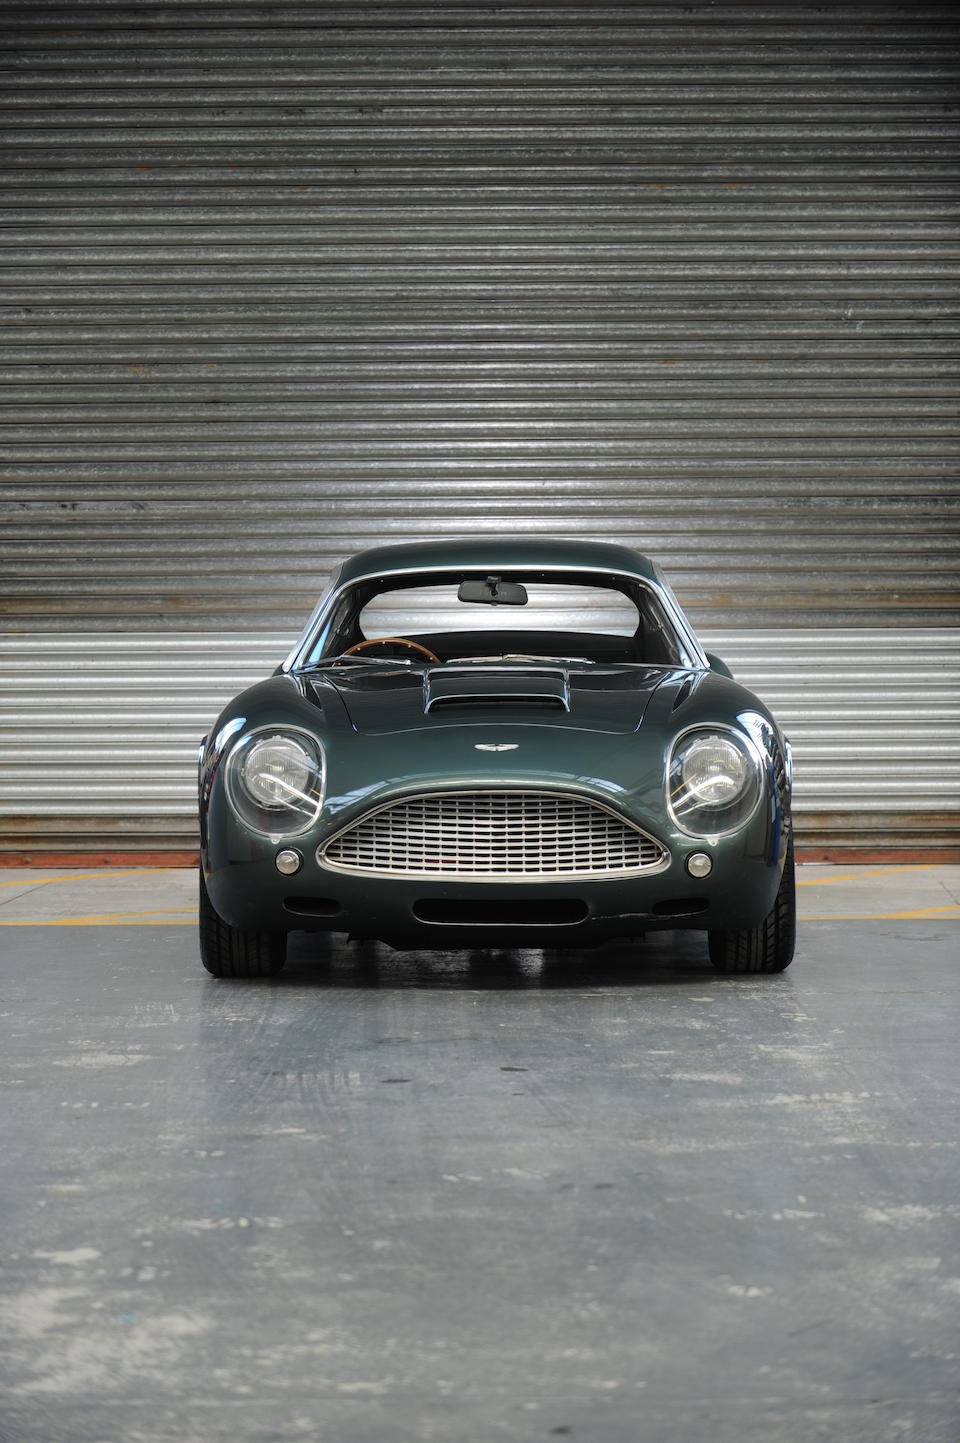 1991 Aston Martin DB4GT Zagato Sanction II Coup&#233;  Chassis no. 0198/R Engine no. 420/0198/GT